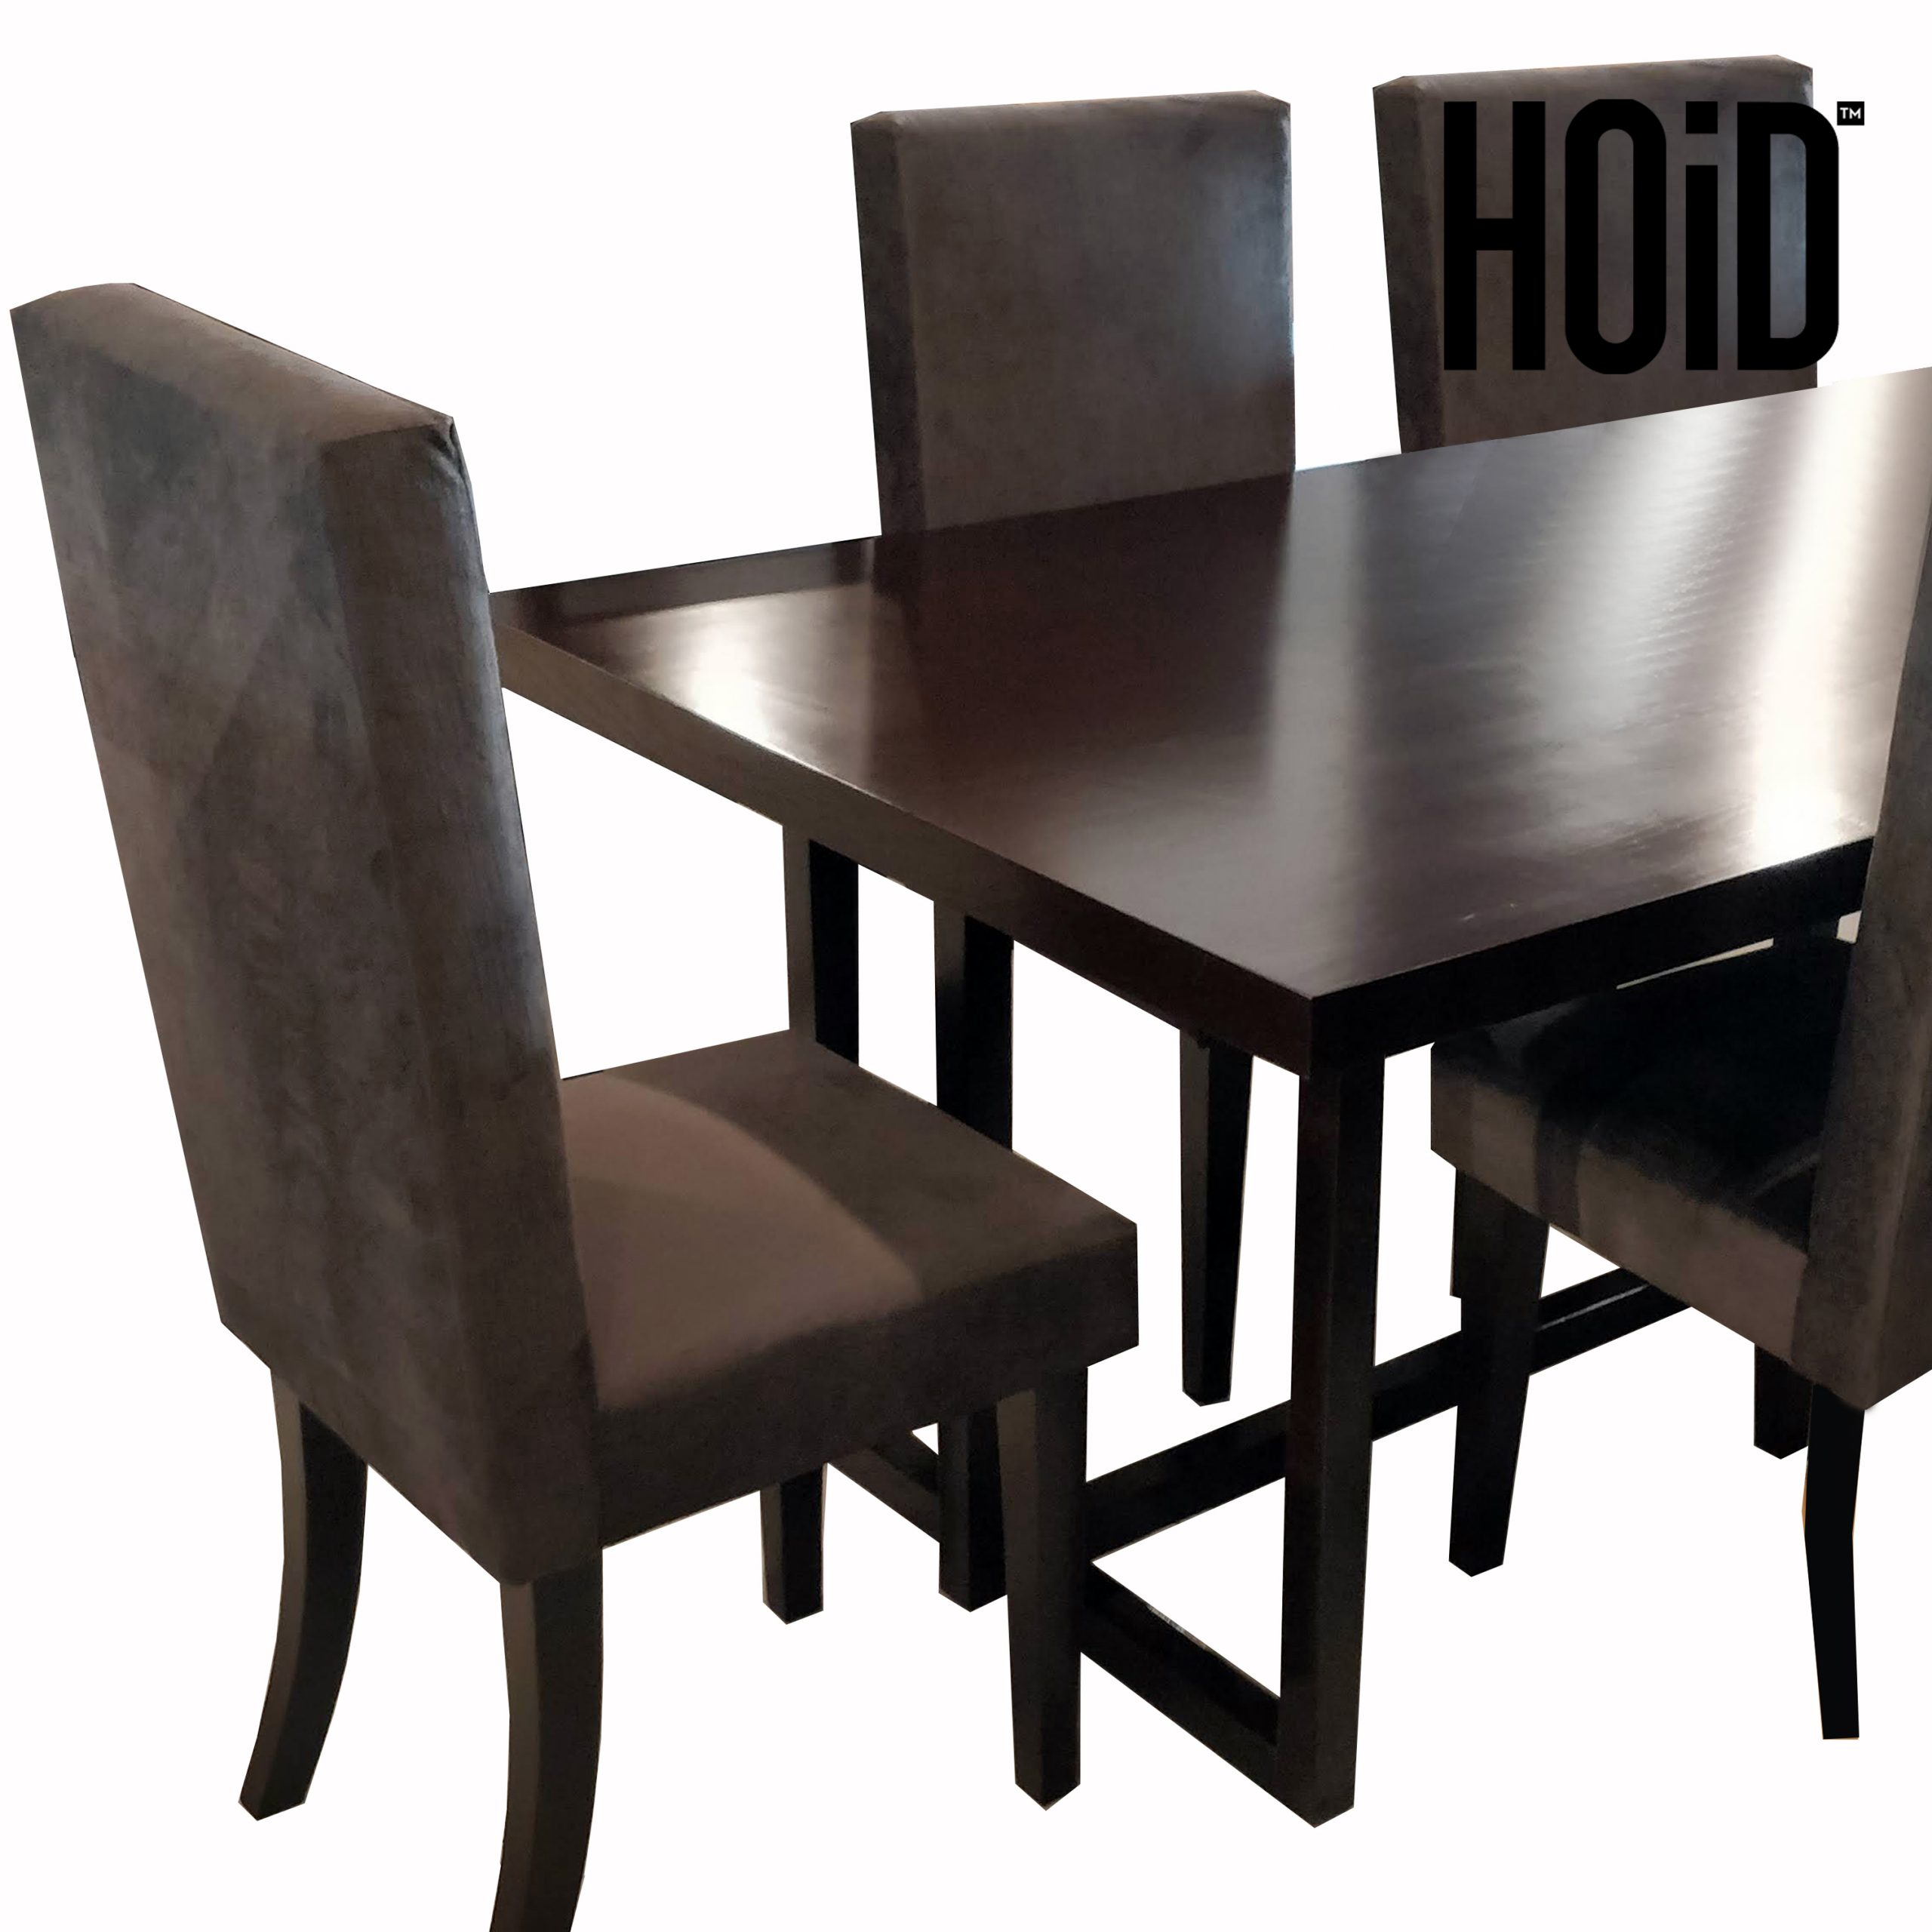 Mit Dining Table With 6 Chairs Hoid Pk, How Long Is A Table With 6 Chairs